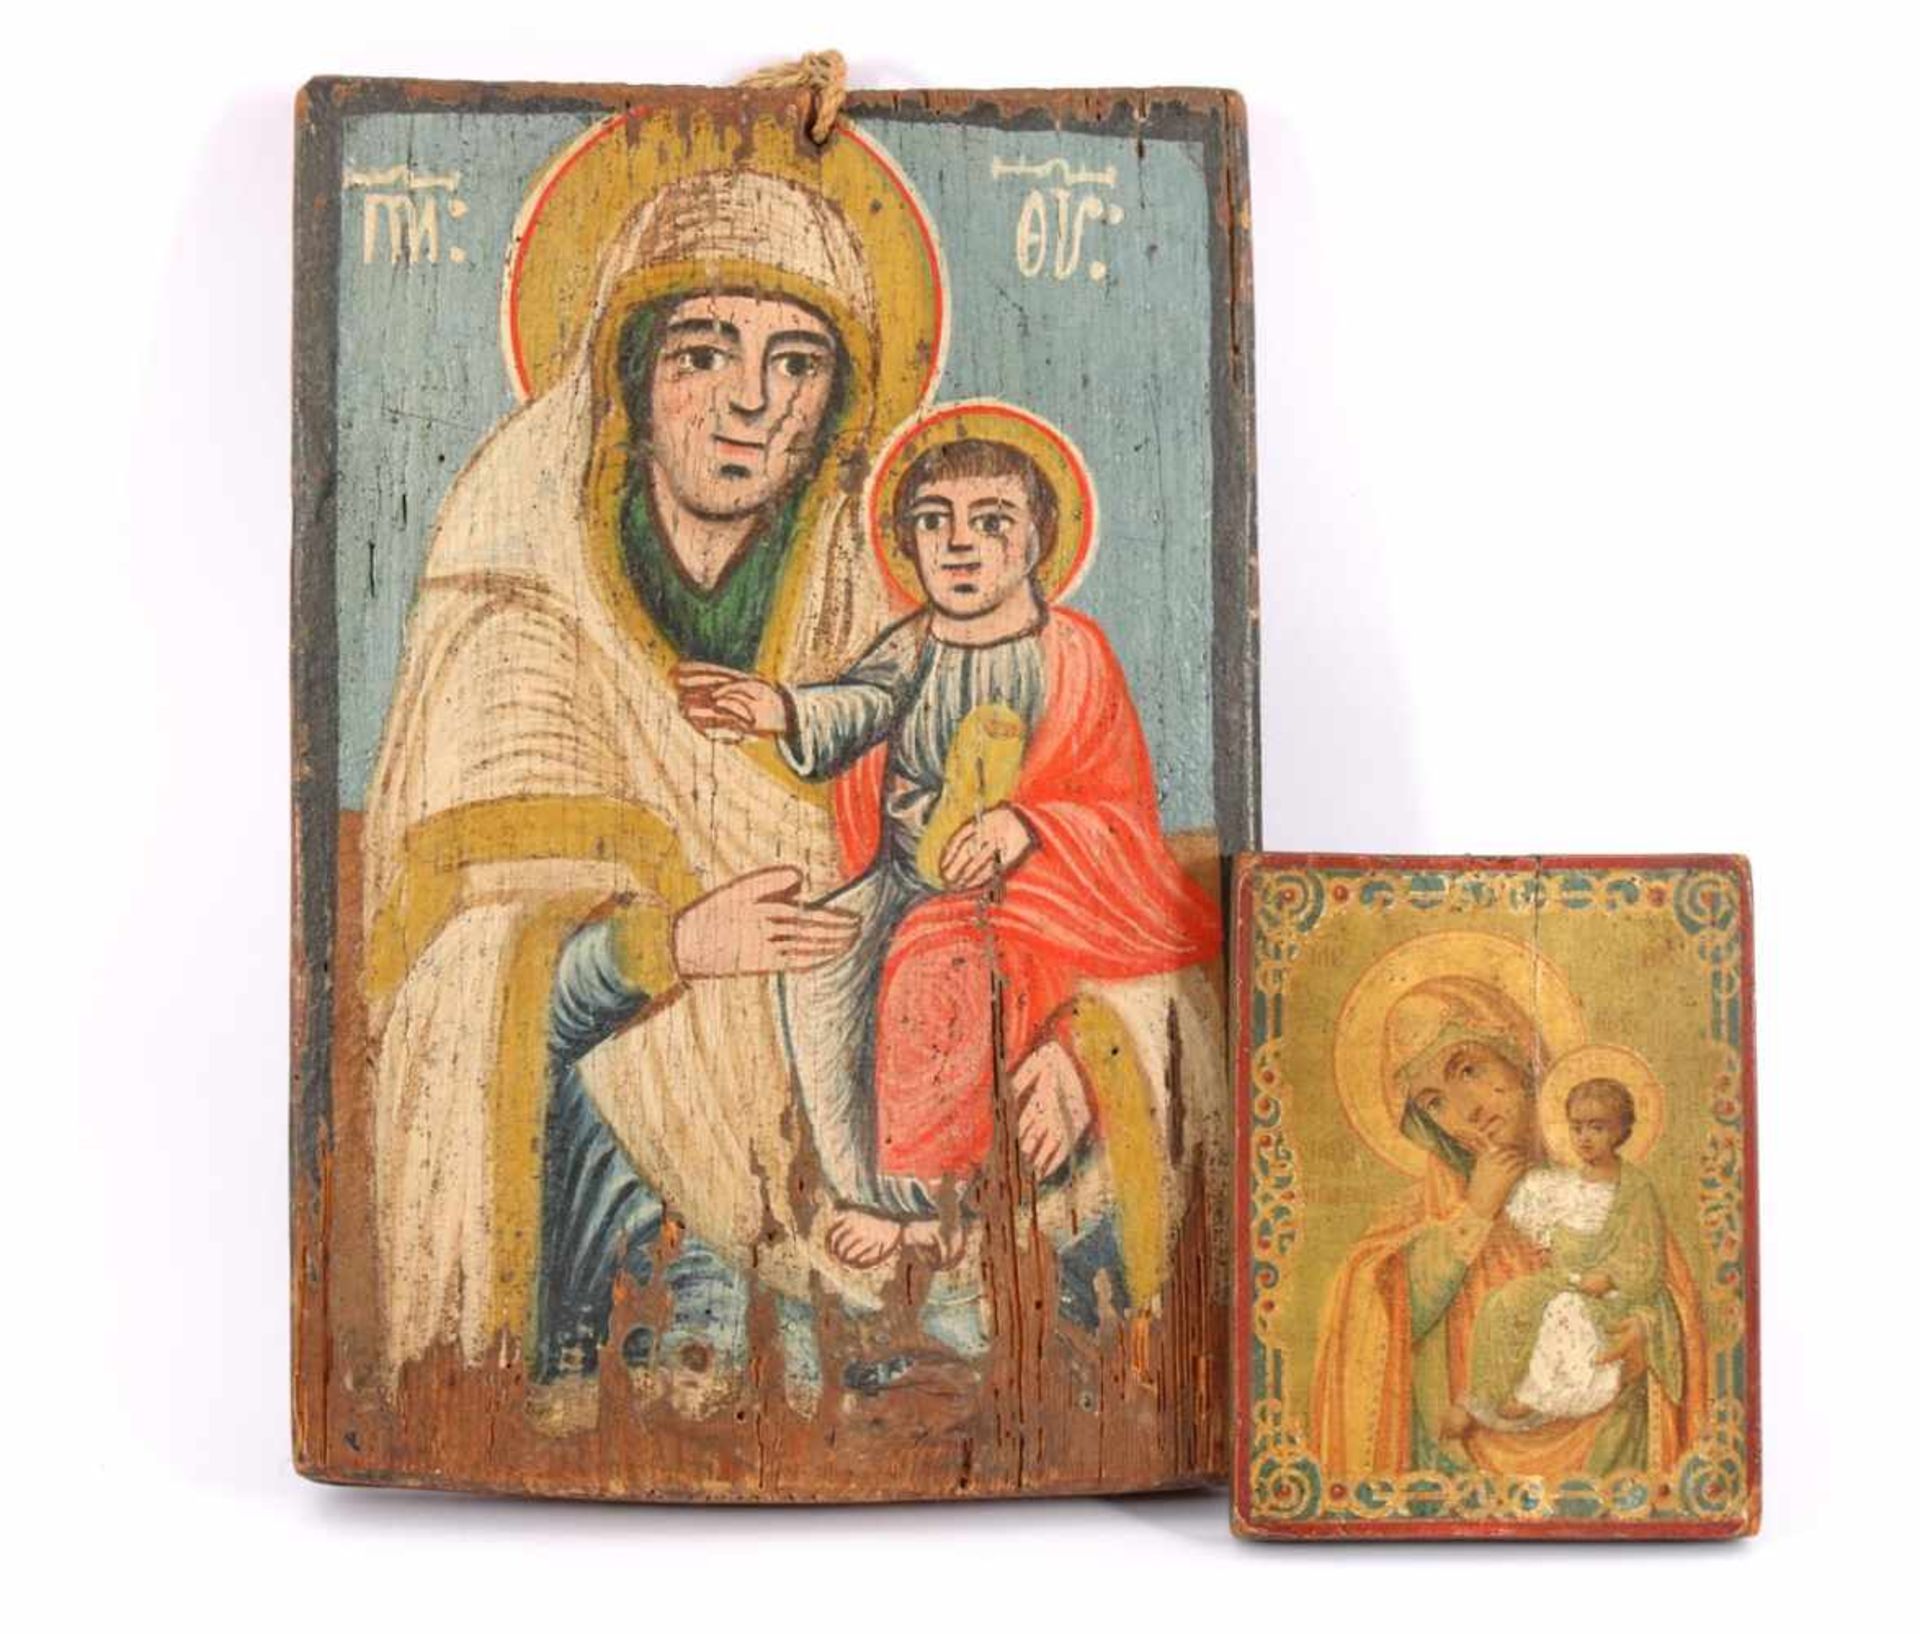 2 Russian icons with images of Madonna and child, 19th century 16x12 cm and 33x23 cm